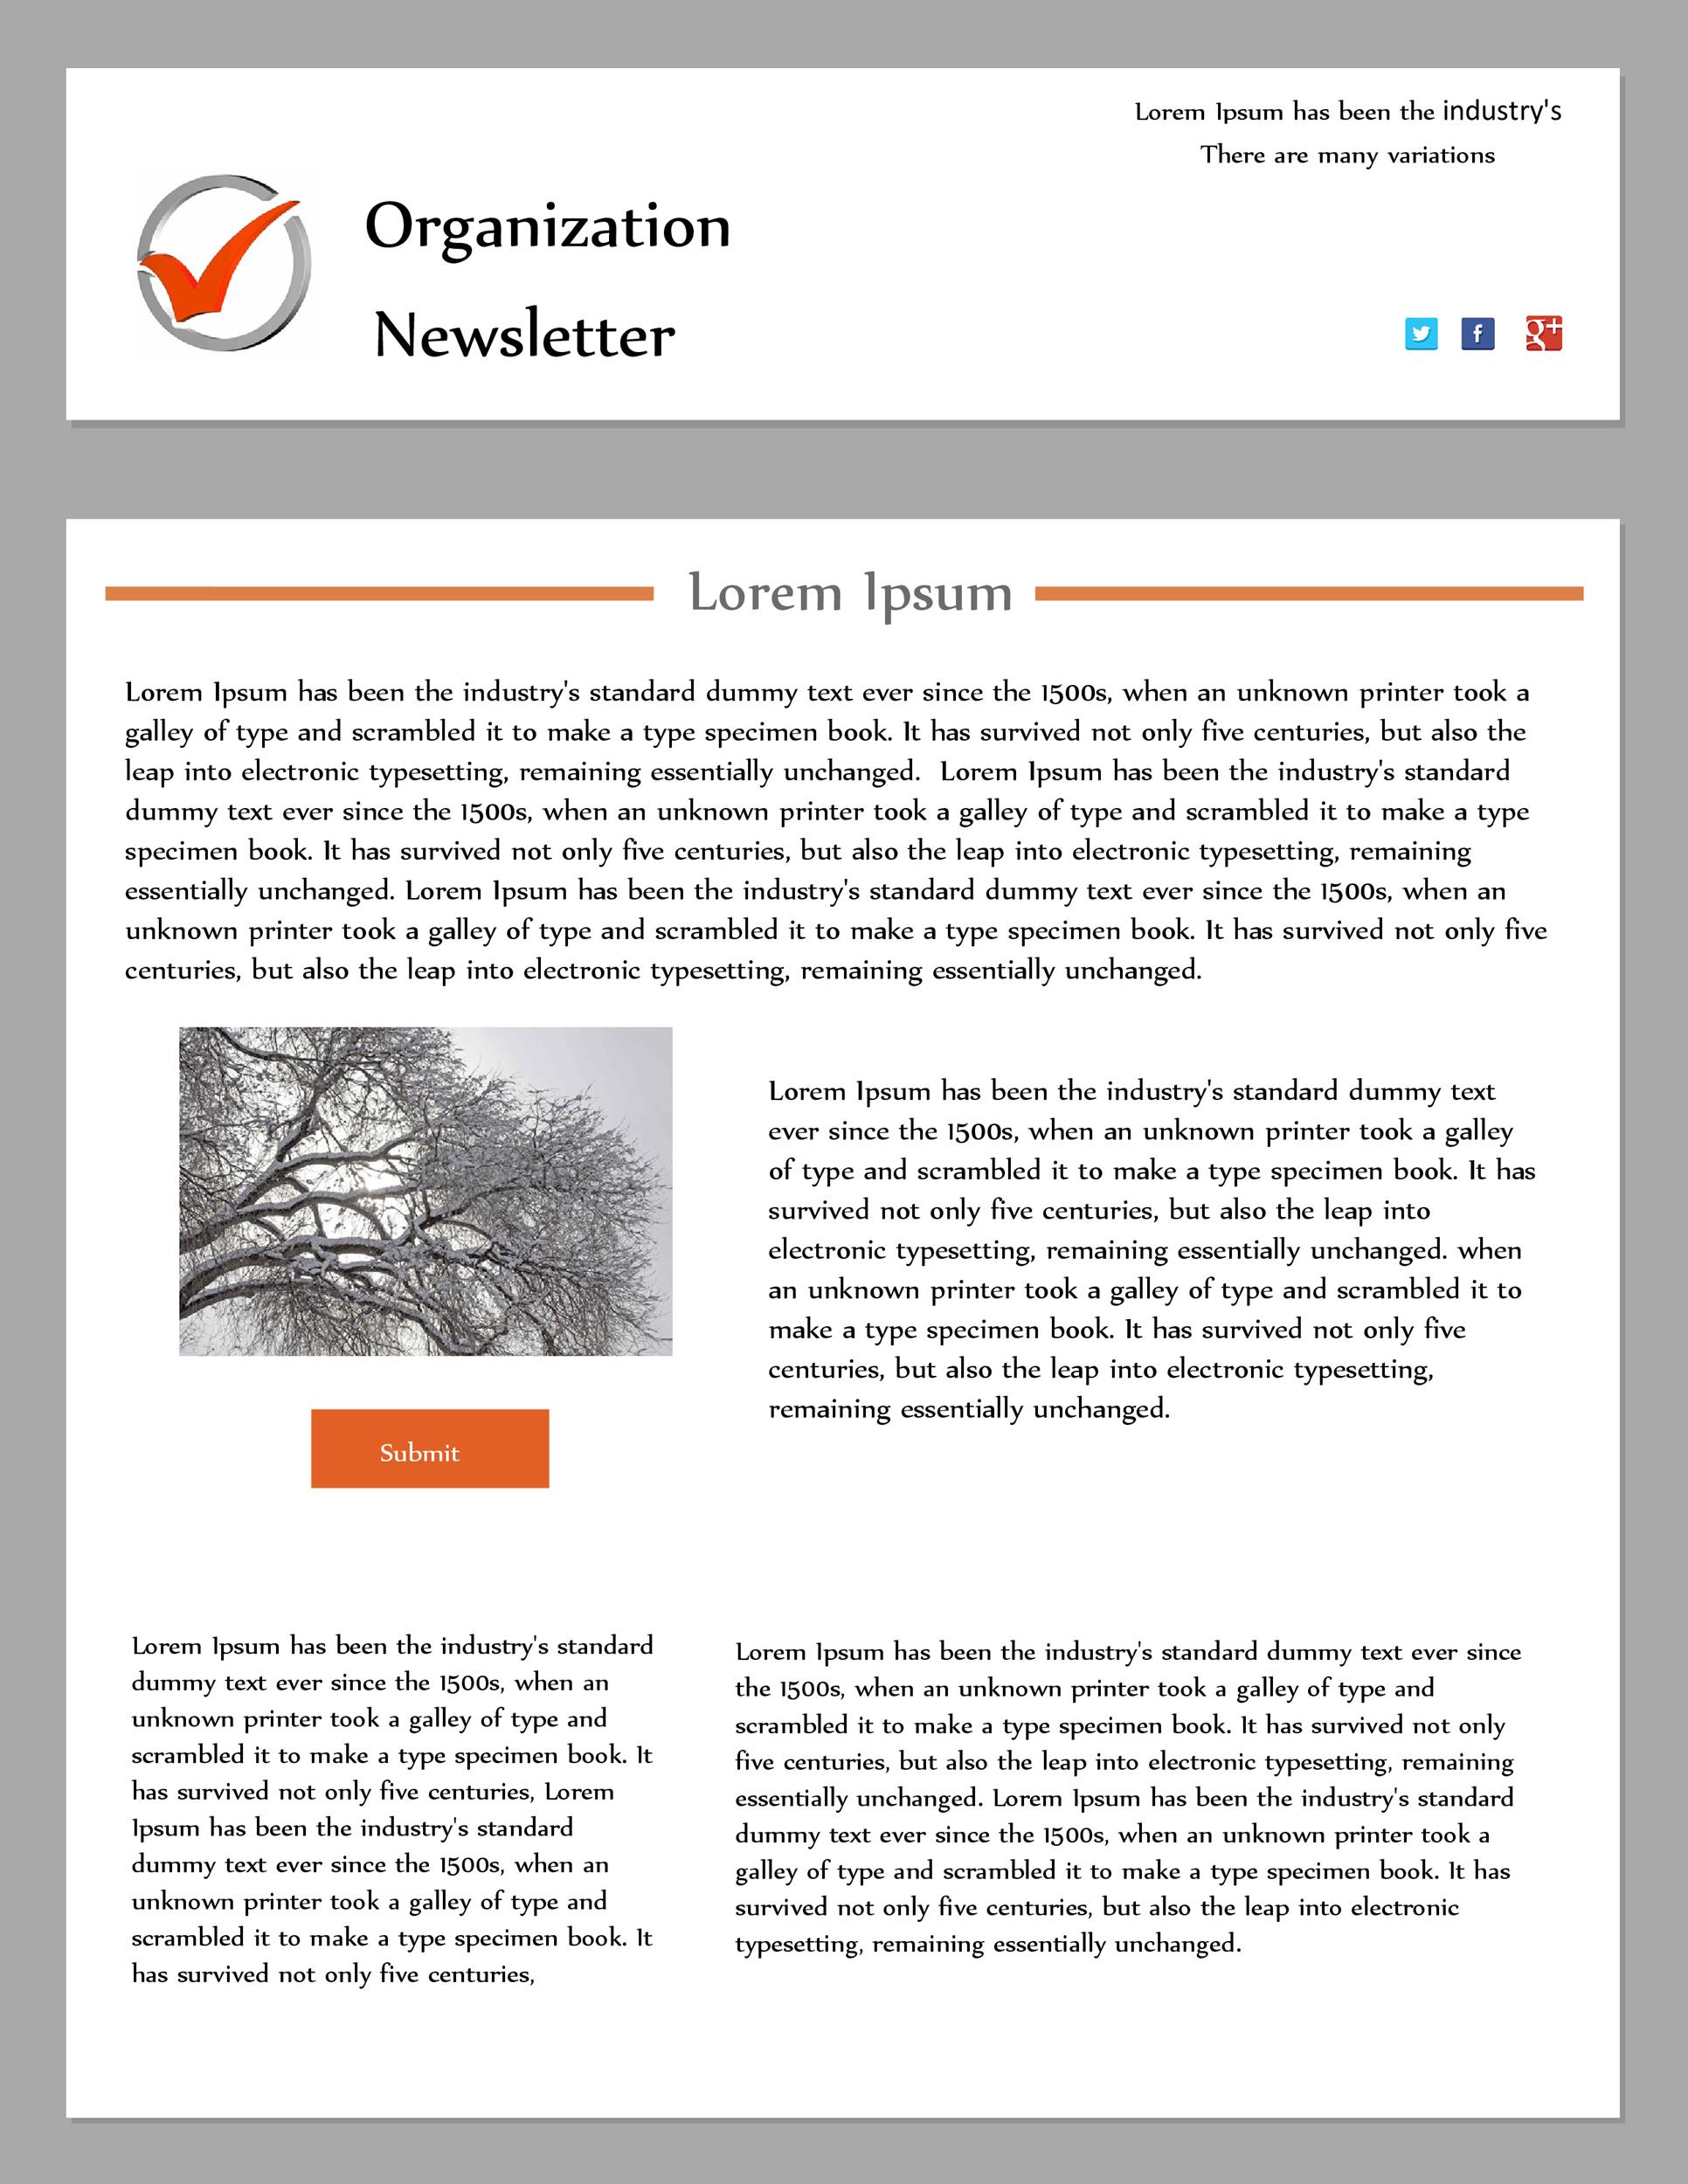 What are some standard newsletter layouts?